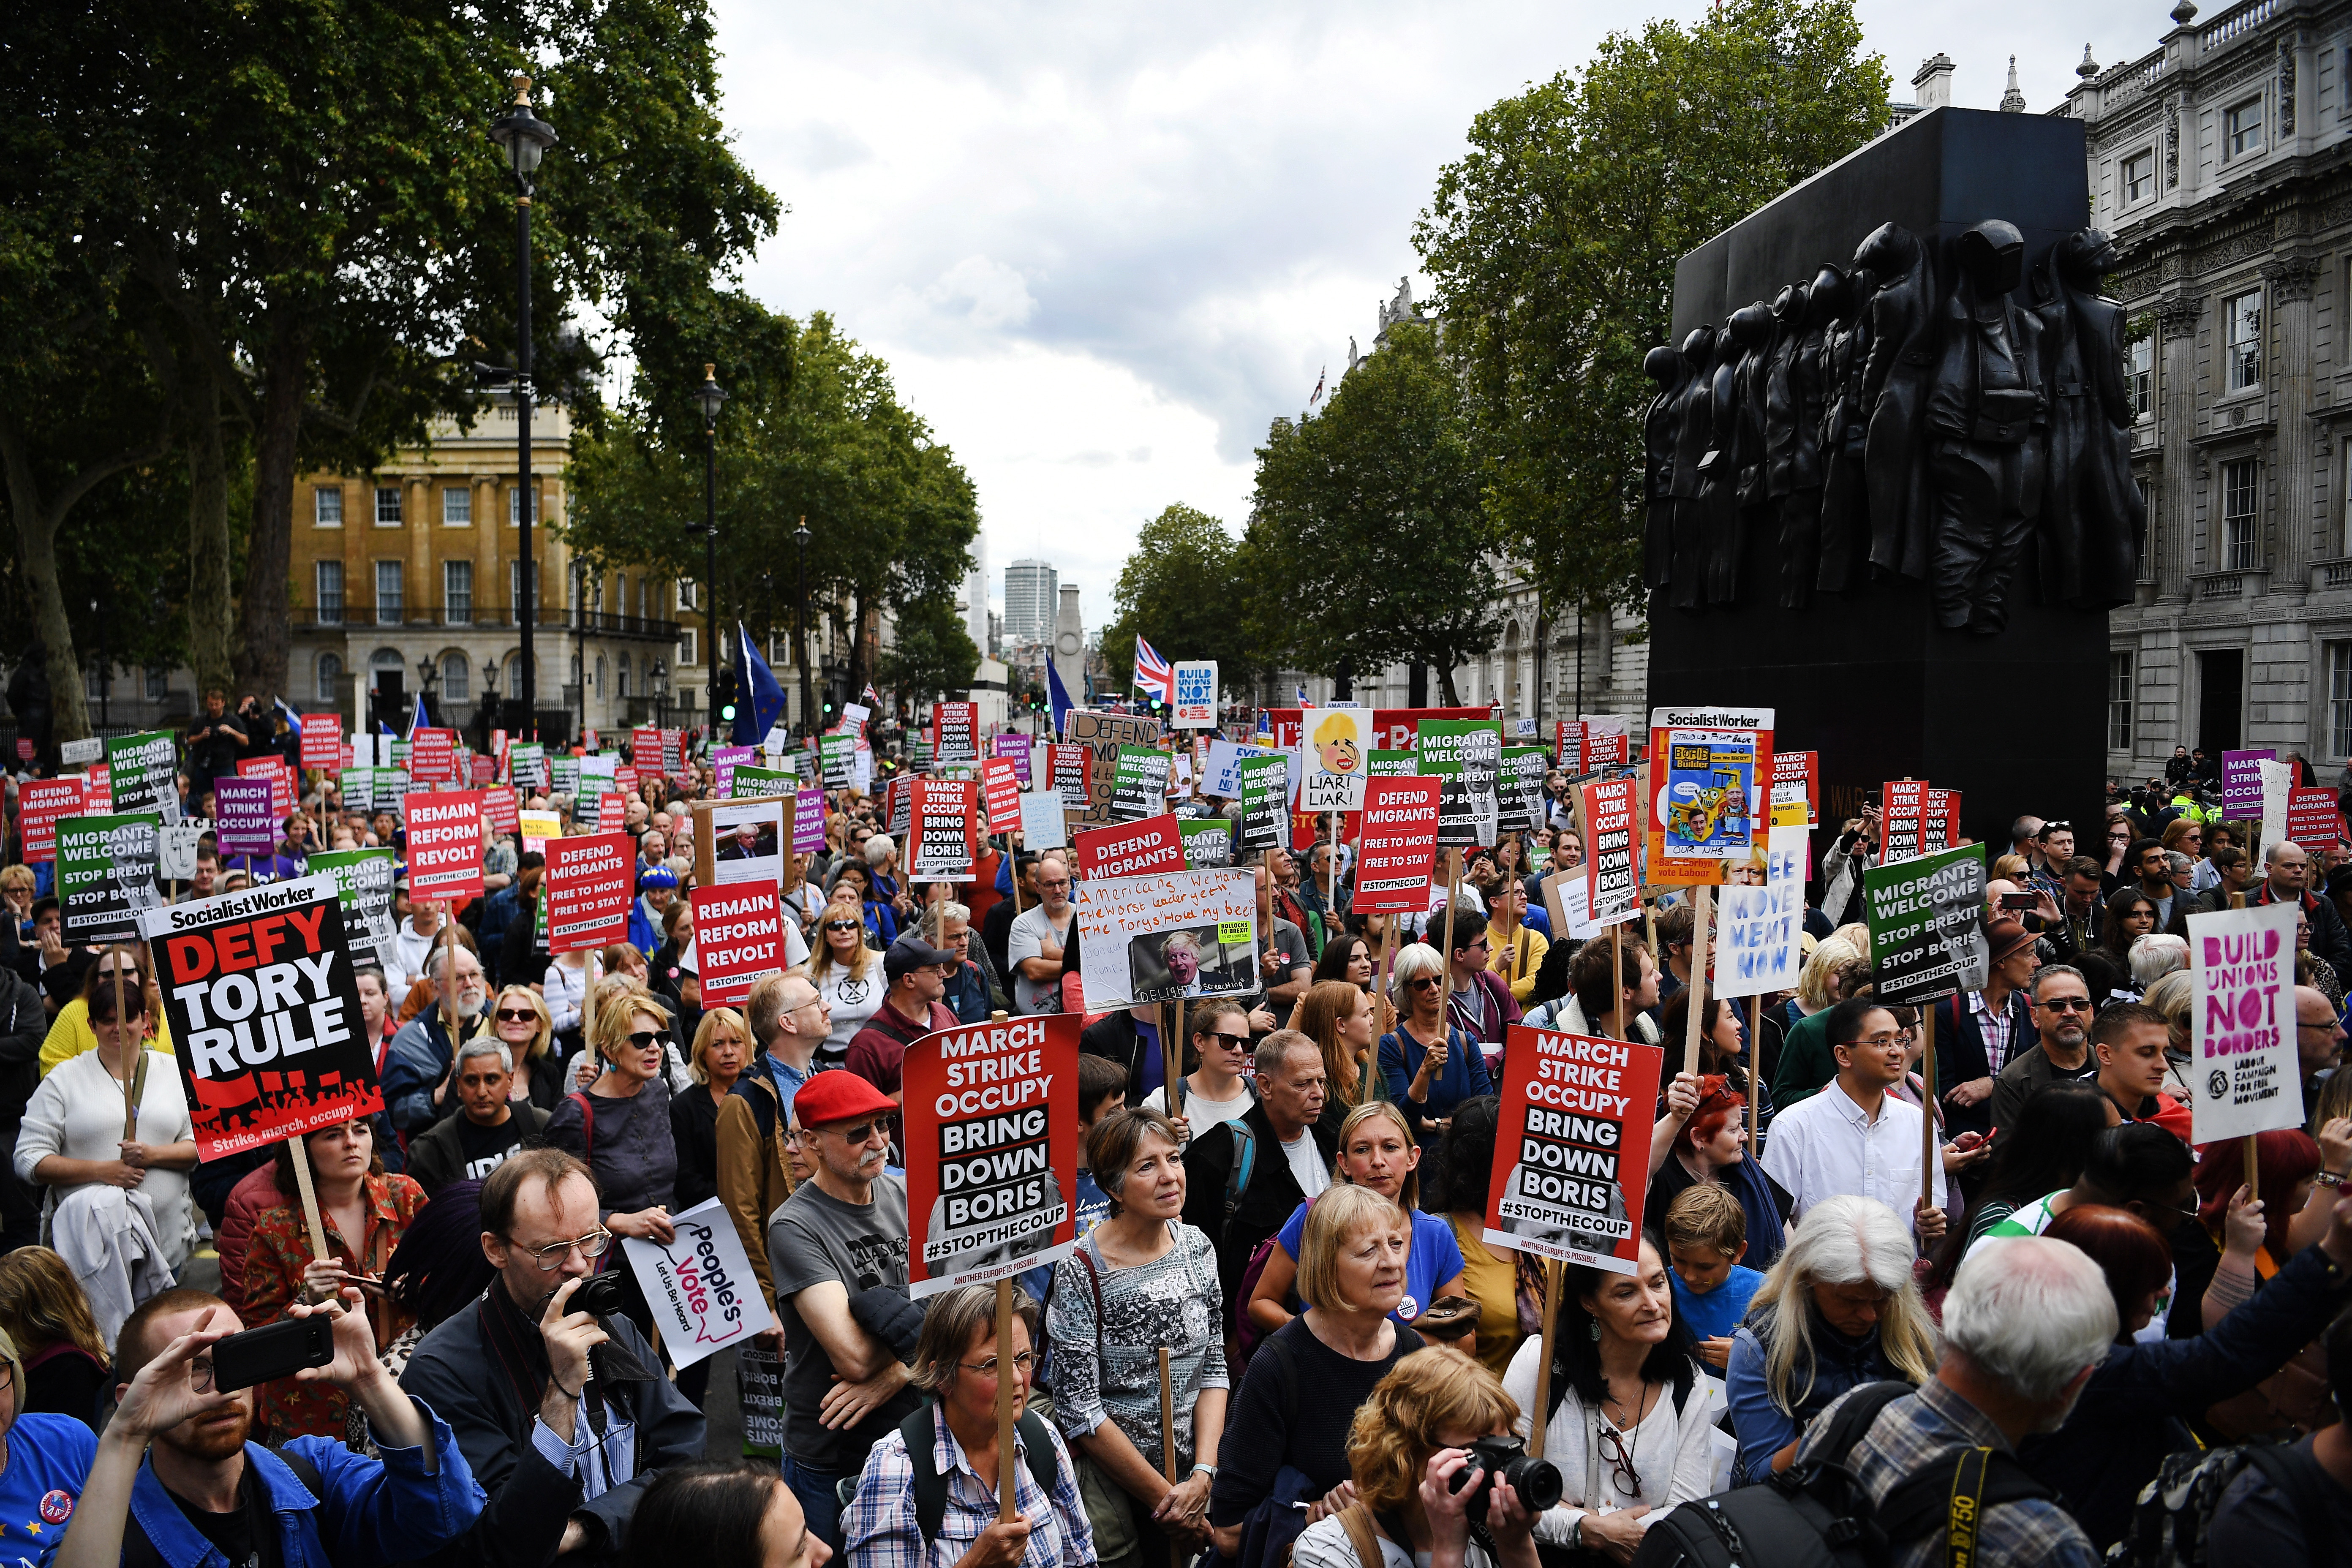 epa07825570 People protest against the government of British Prime Minister Boris Johnson, in London, Britain, 07 September 2019. The event 'Demand Democracy: Johnson Out! #StopTheCoup' calls for the resignation of British Prime Minister Boris Johnson and an end to his Brexit agenda.  EPA/ANDY RAIN